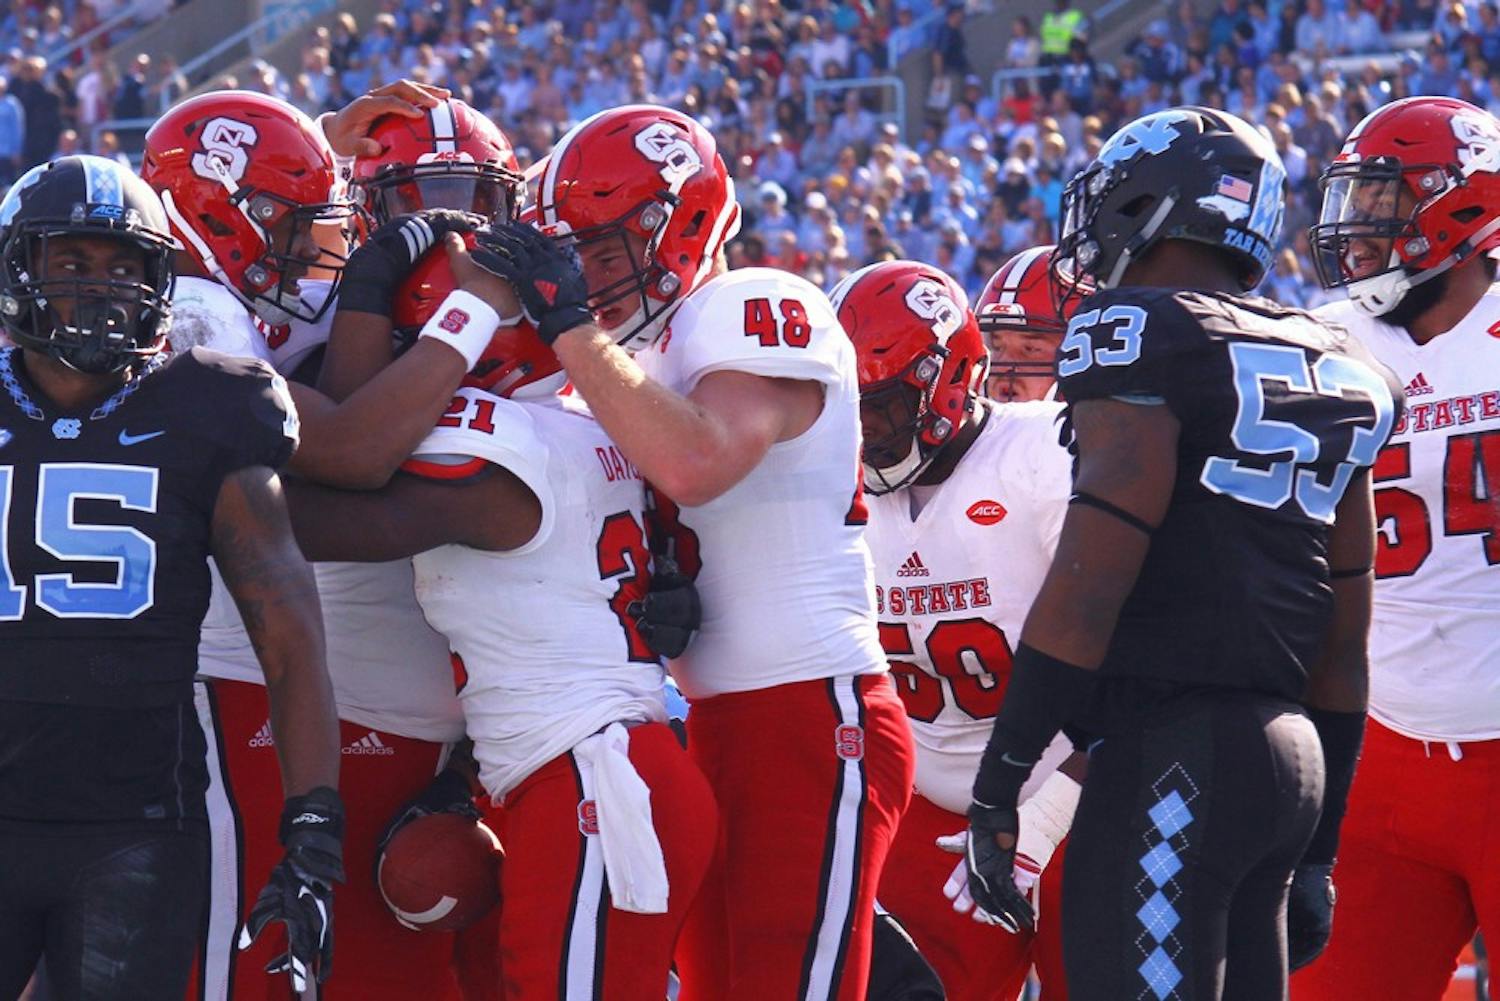 N.C. State players celebrate after a touchdown.&nbsp;